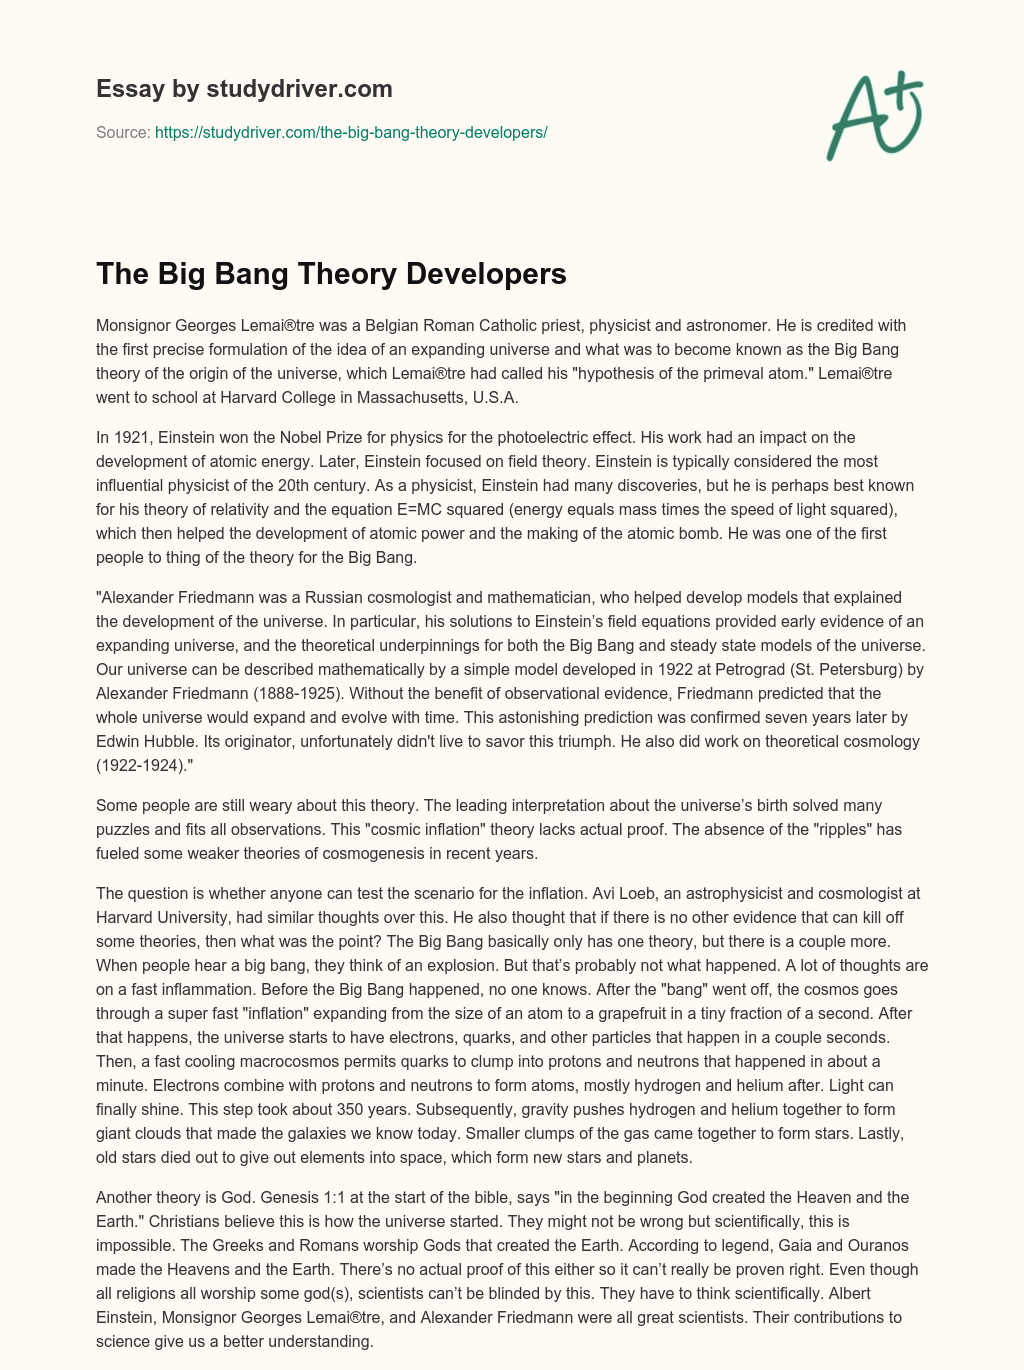 The Big Bang Theory Developers essay